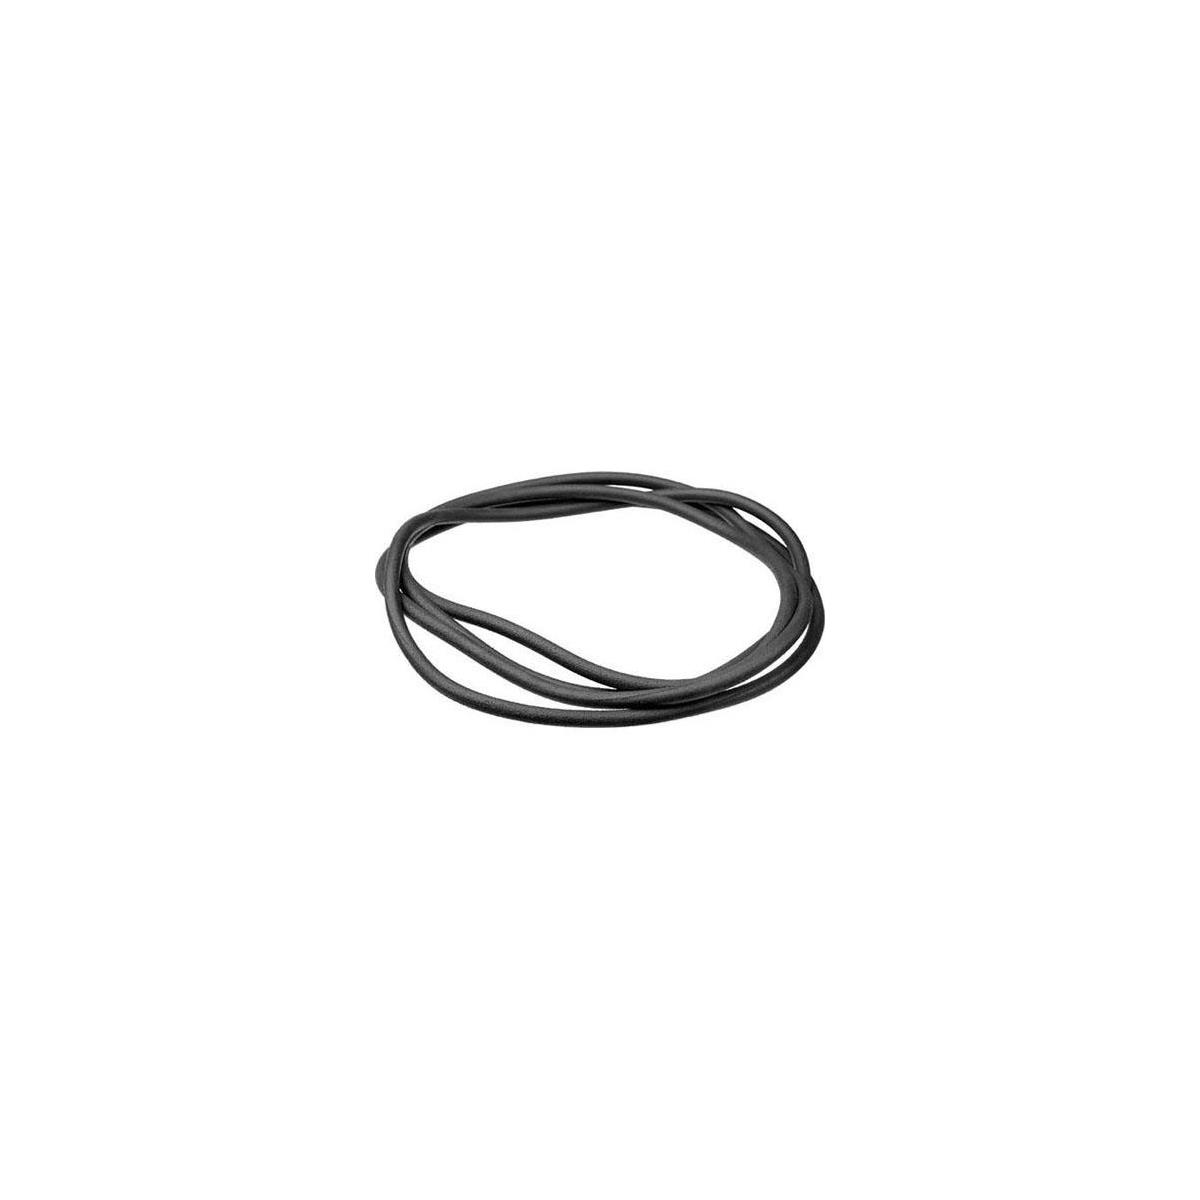 Pelican 0353 Replacement O-Ring for Pelican 0350 Cases -  0353-321-000